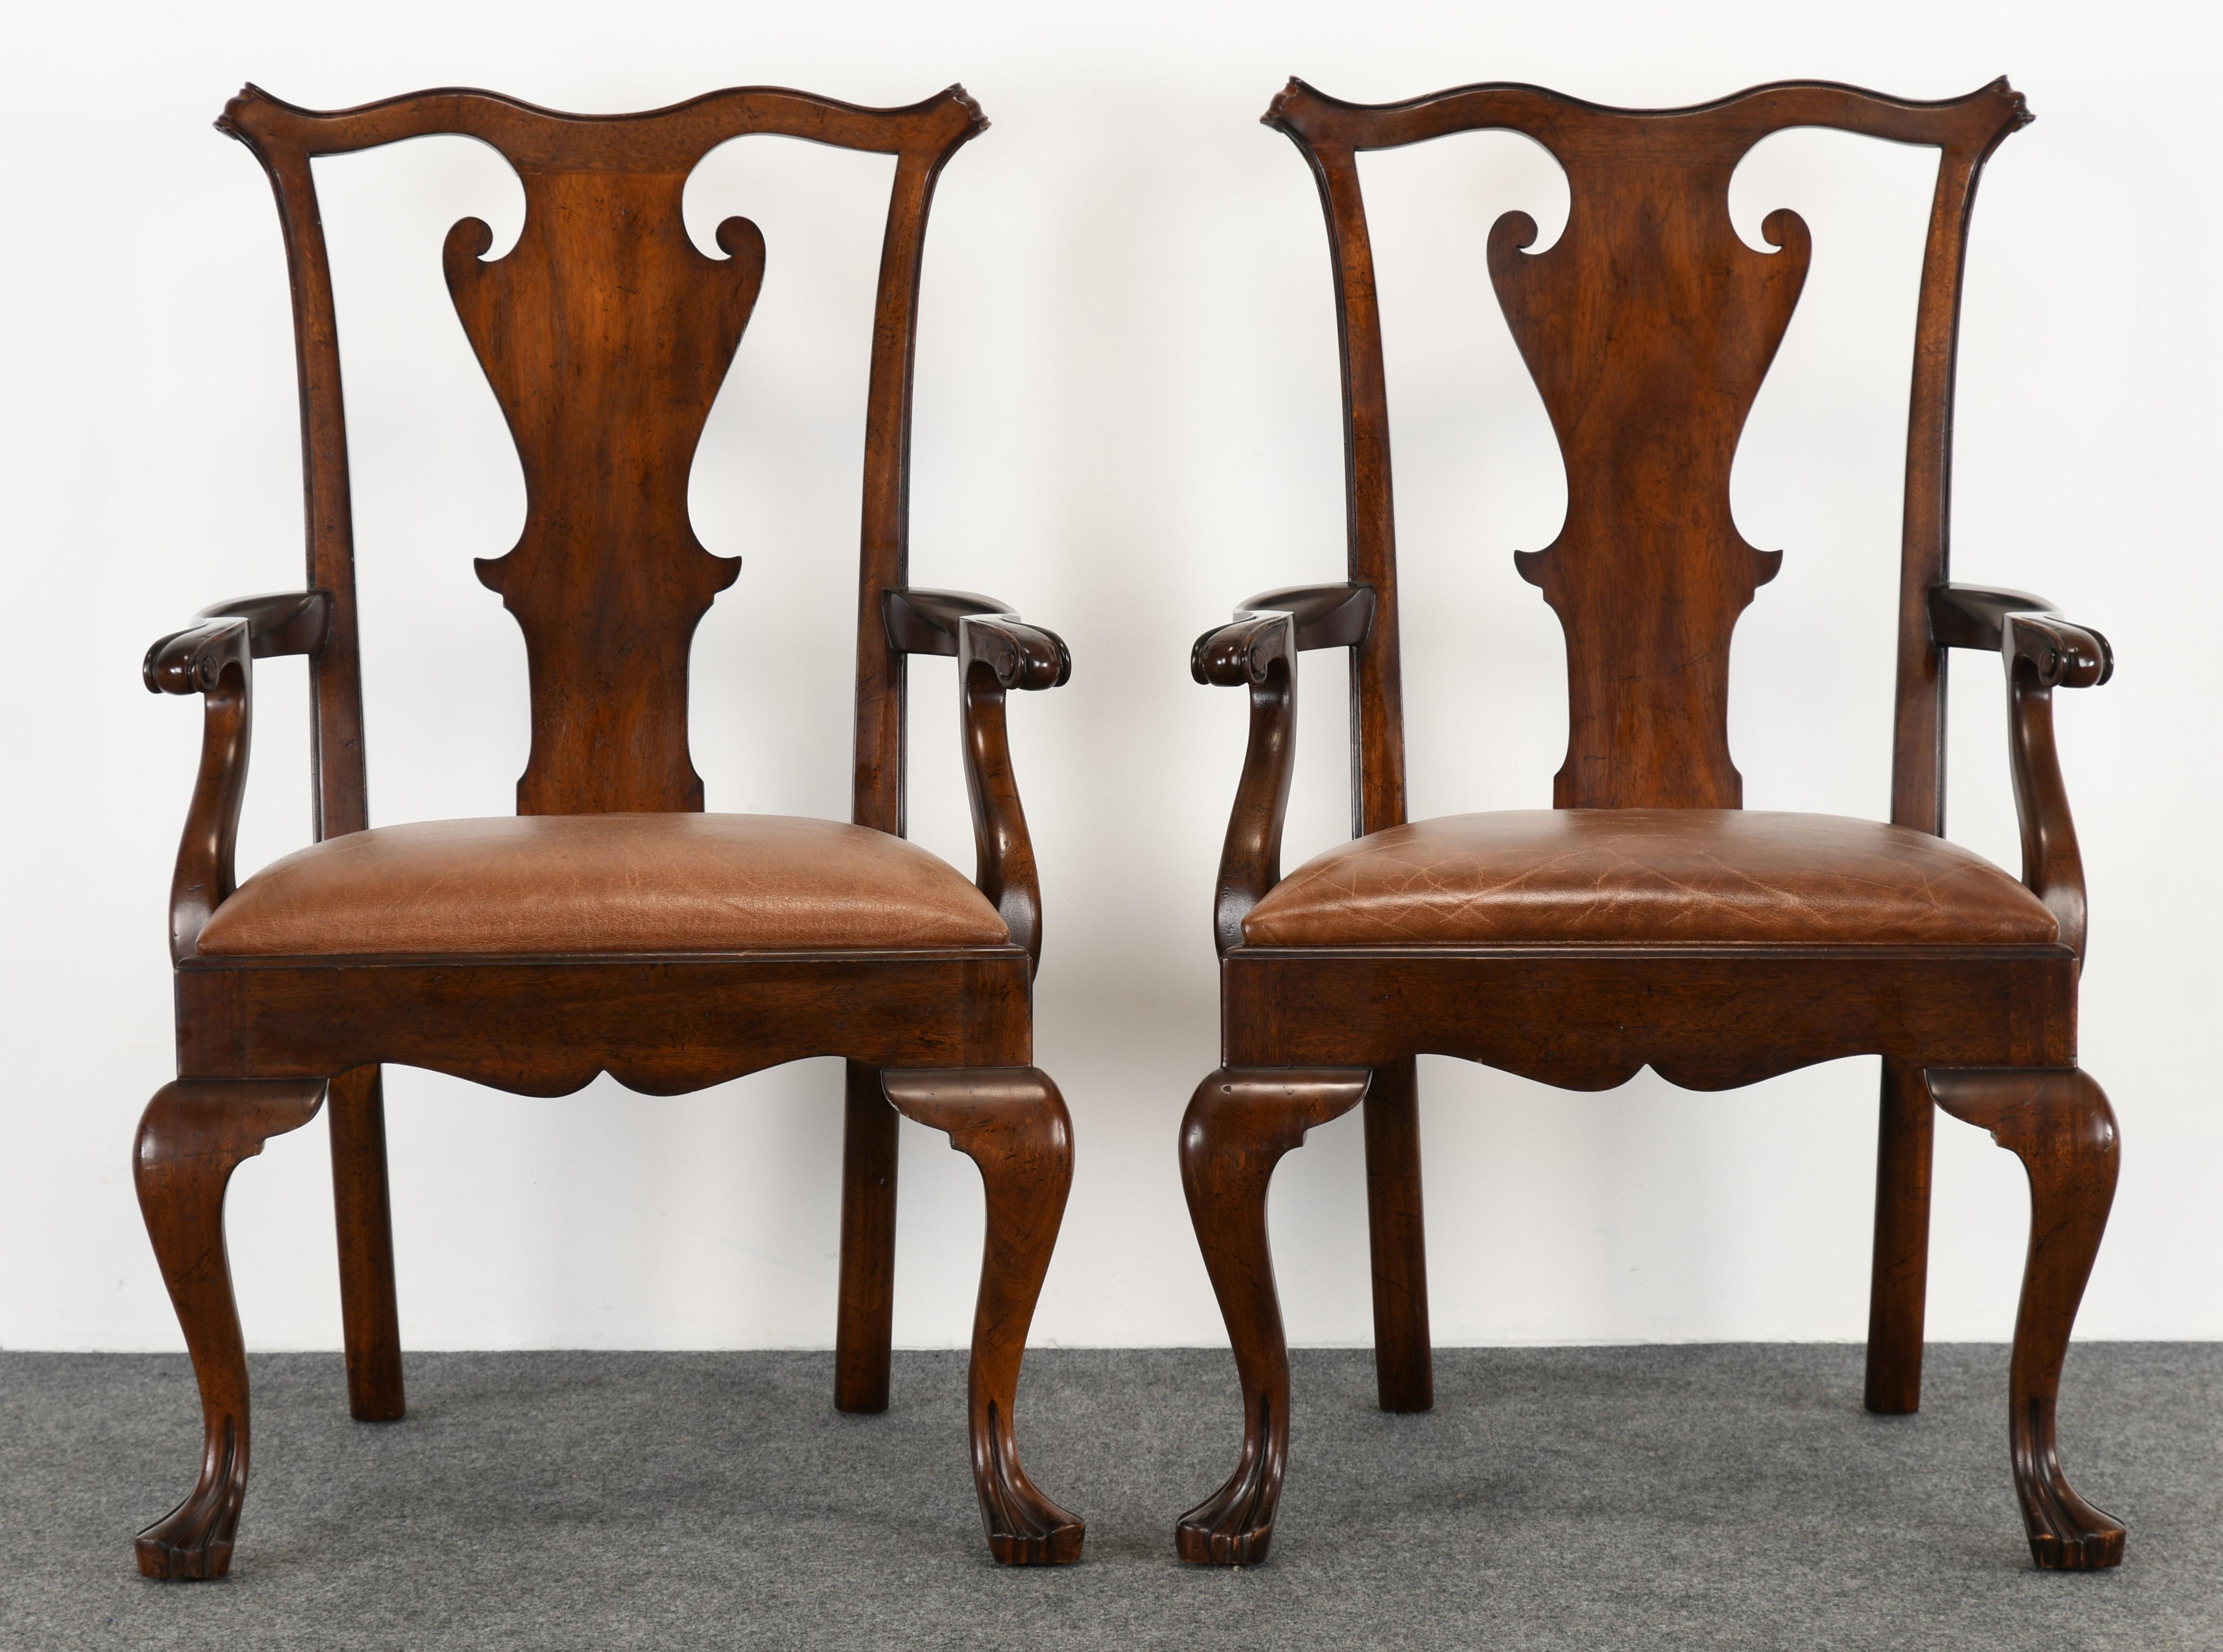 A fabulous set of eight Ralph Lauren Queen Anne-style dining chairs. This set consists of six side chairs and two armchairs. Each chair is beautifully made with substantial scale. These solid mahogany chairs with distressed leather seats would look